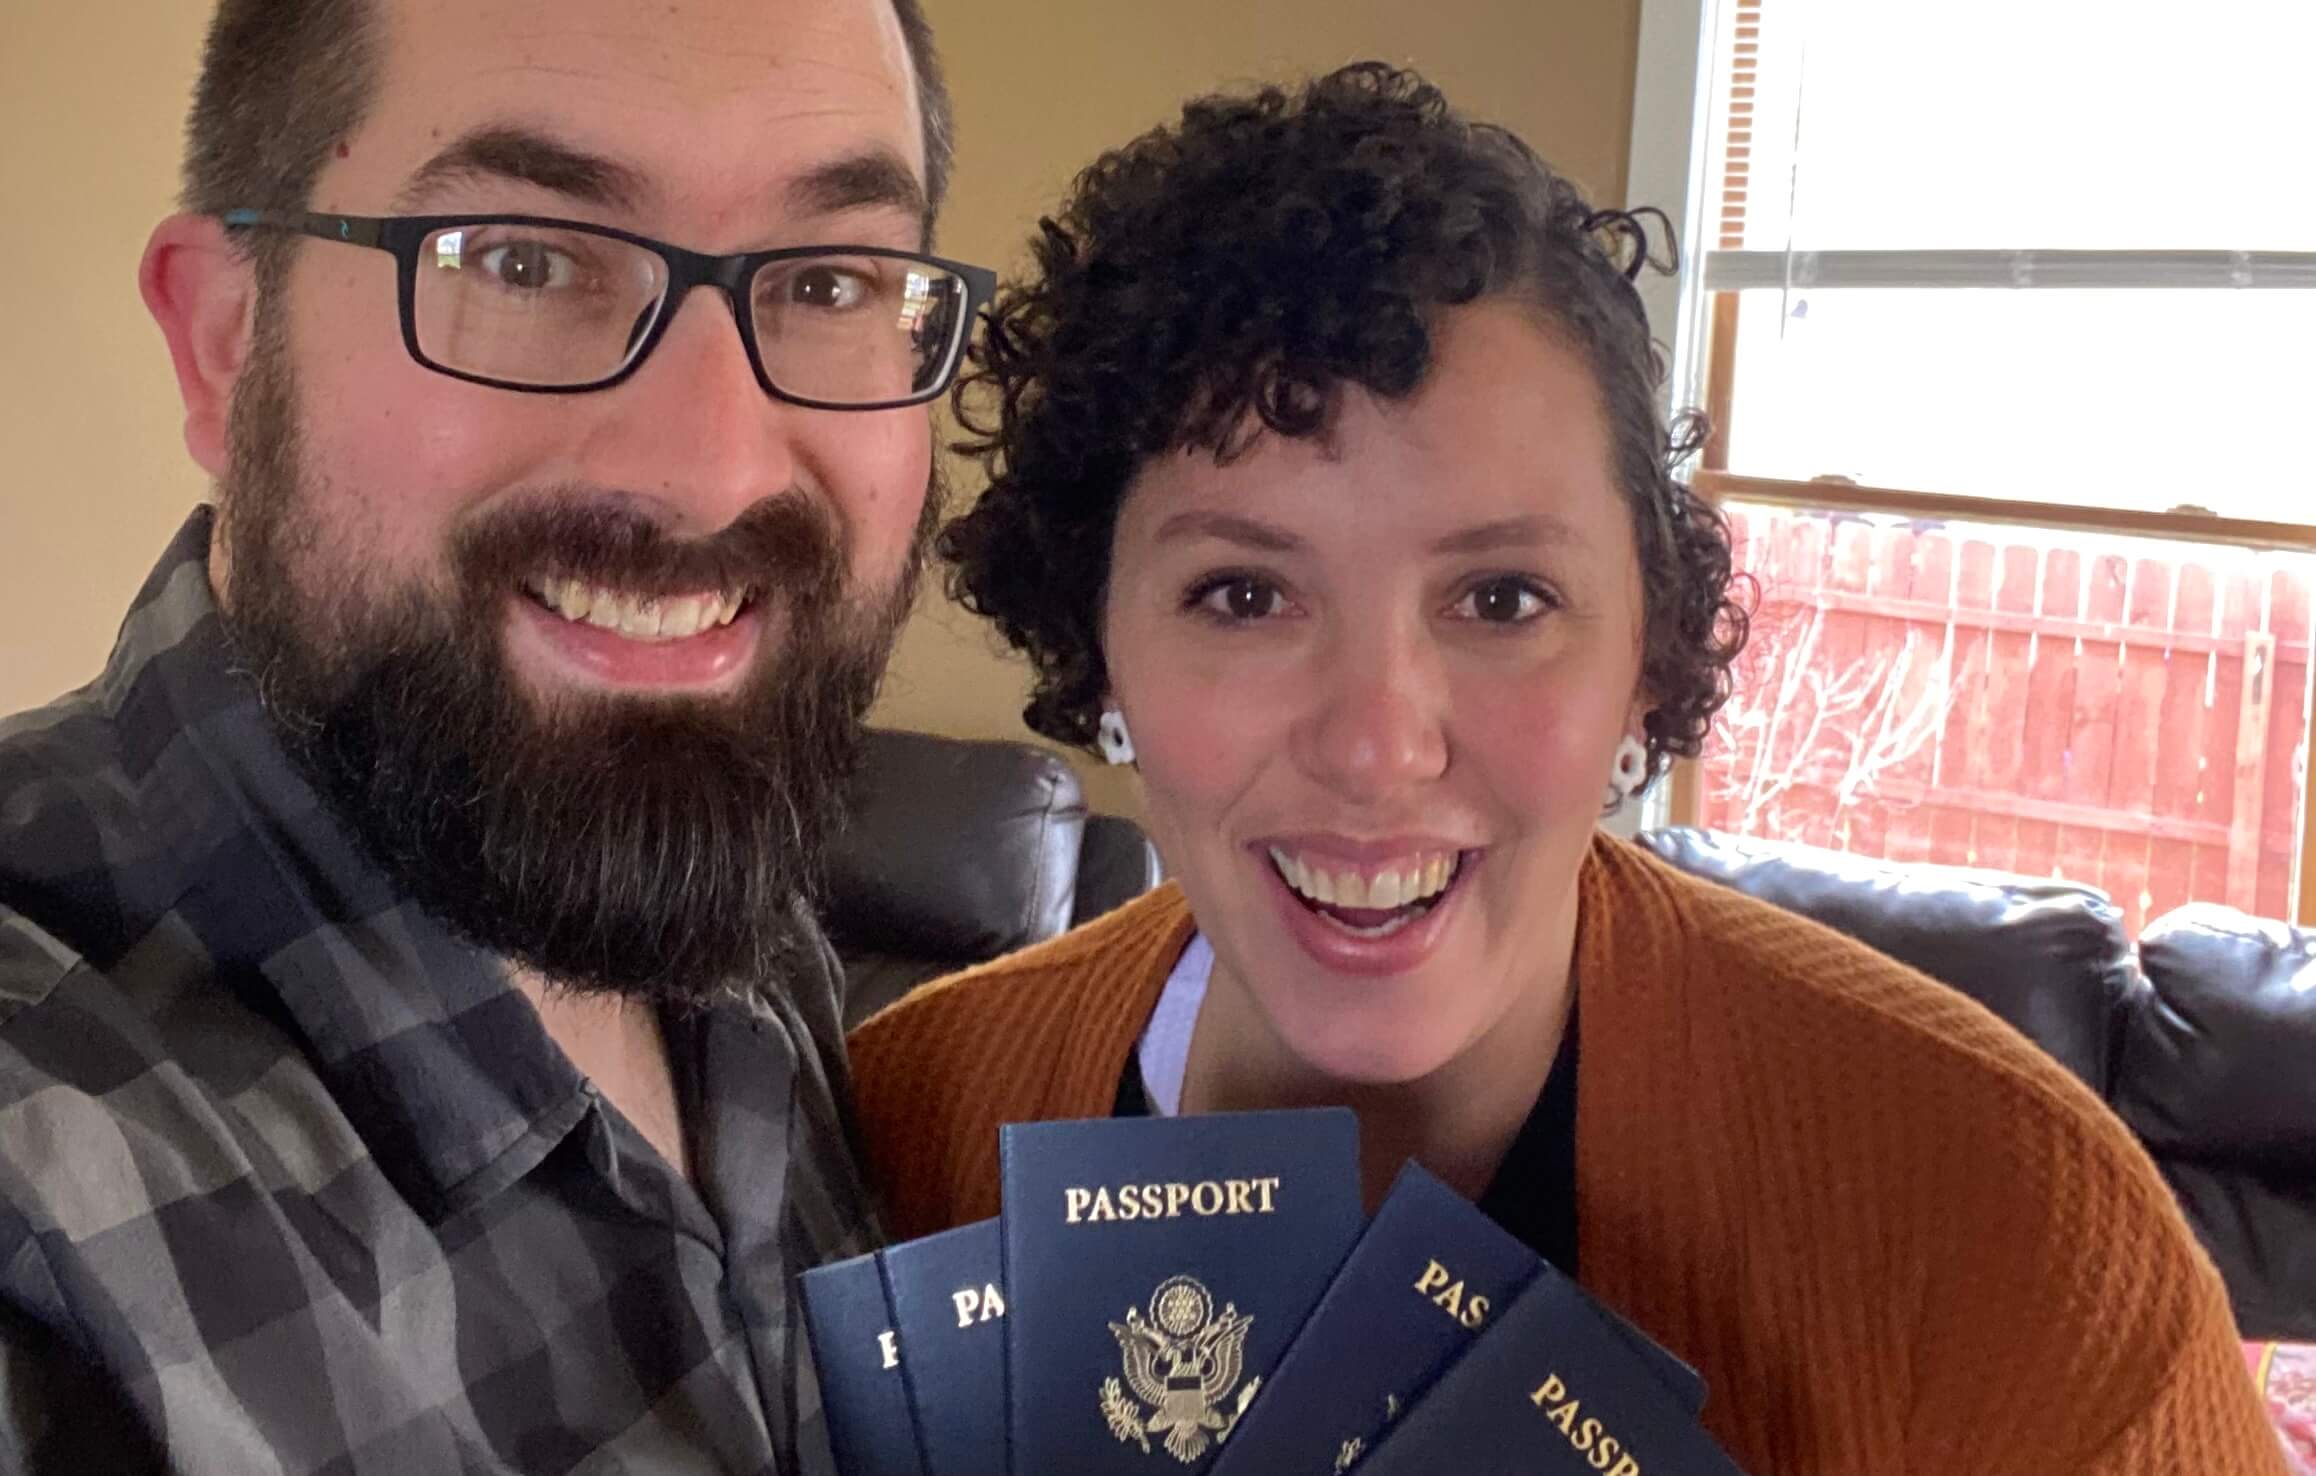 Rejoice! For Our Visas Were Lost But Have Been Found Again